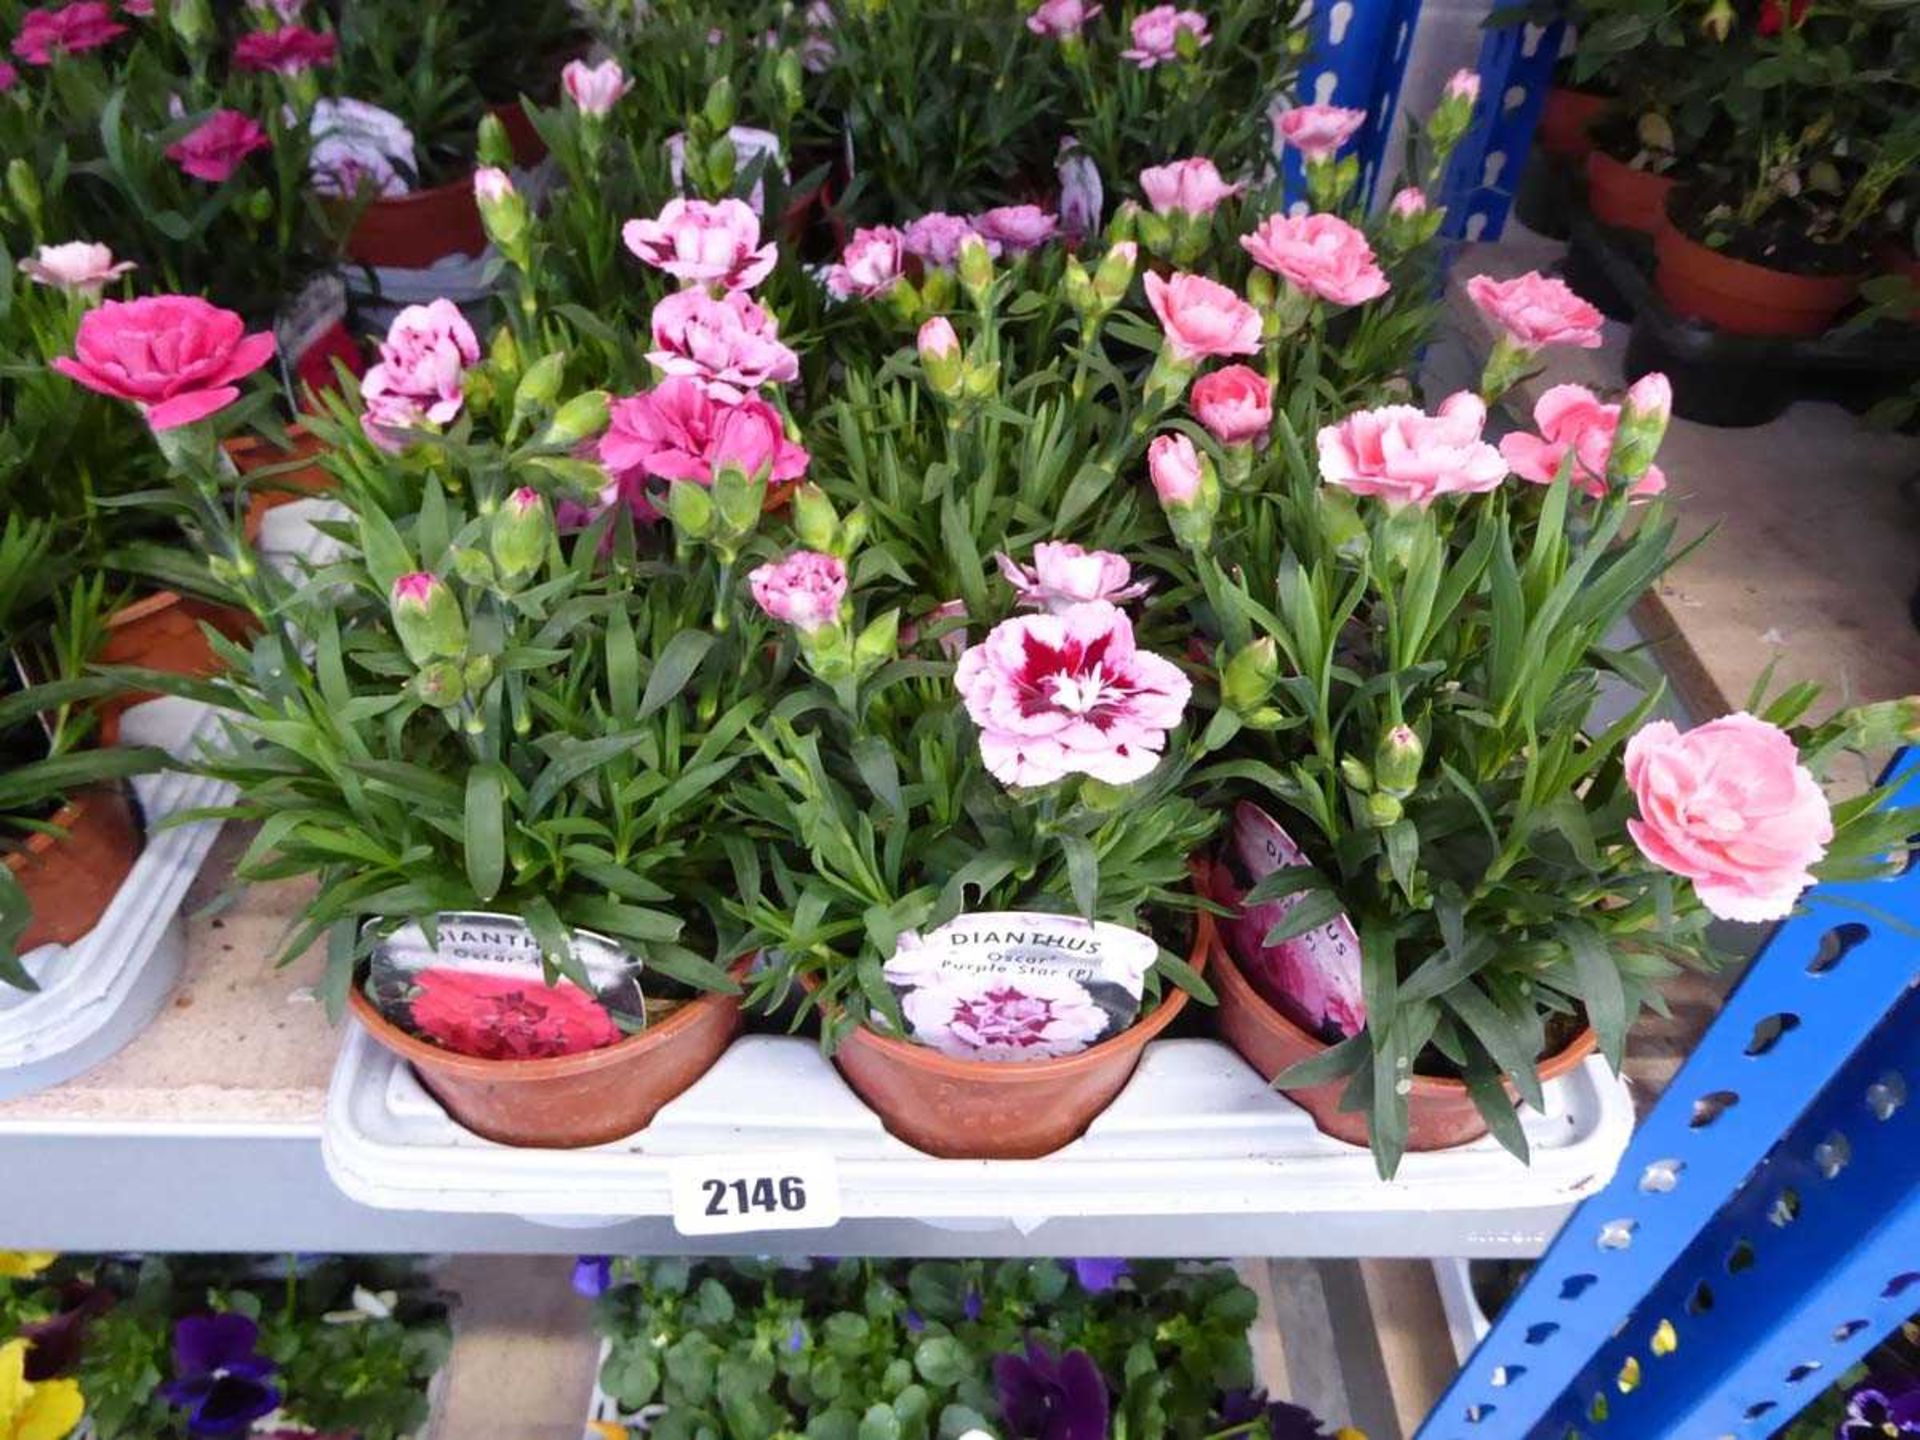 Tray containing 9 pots of white and red Oscar dianthus